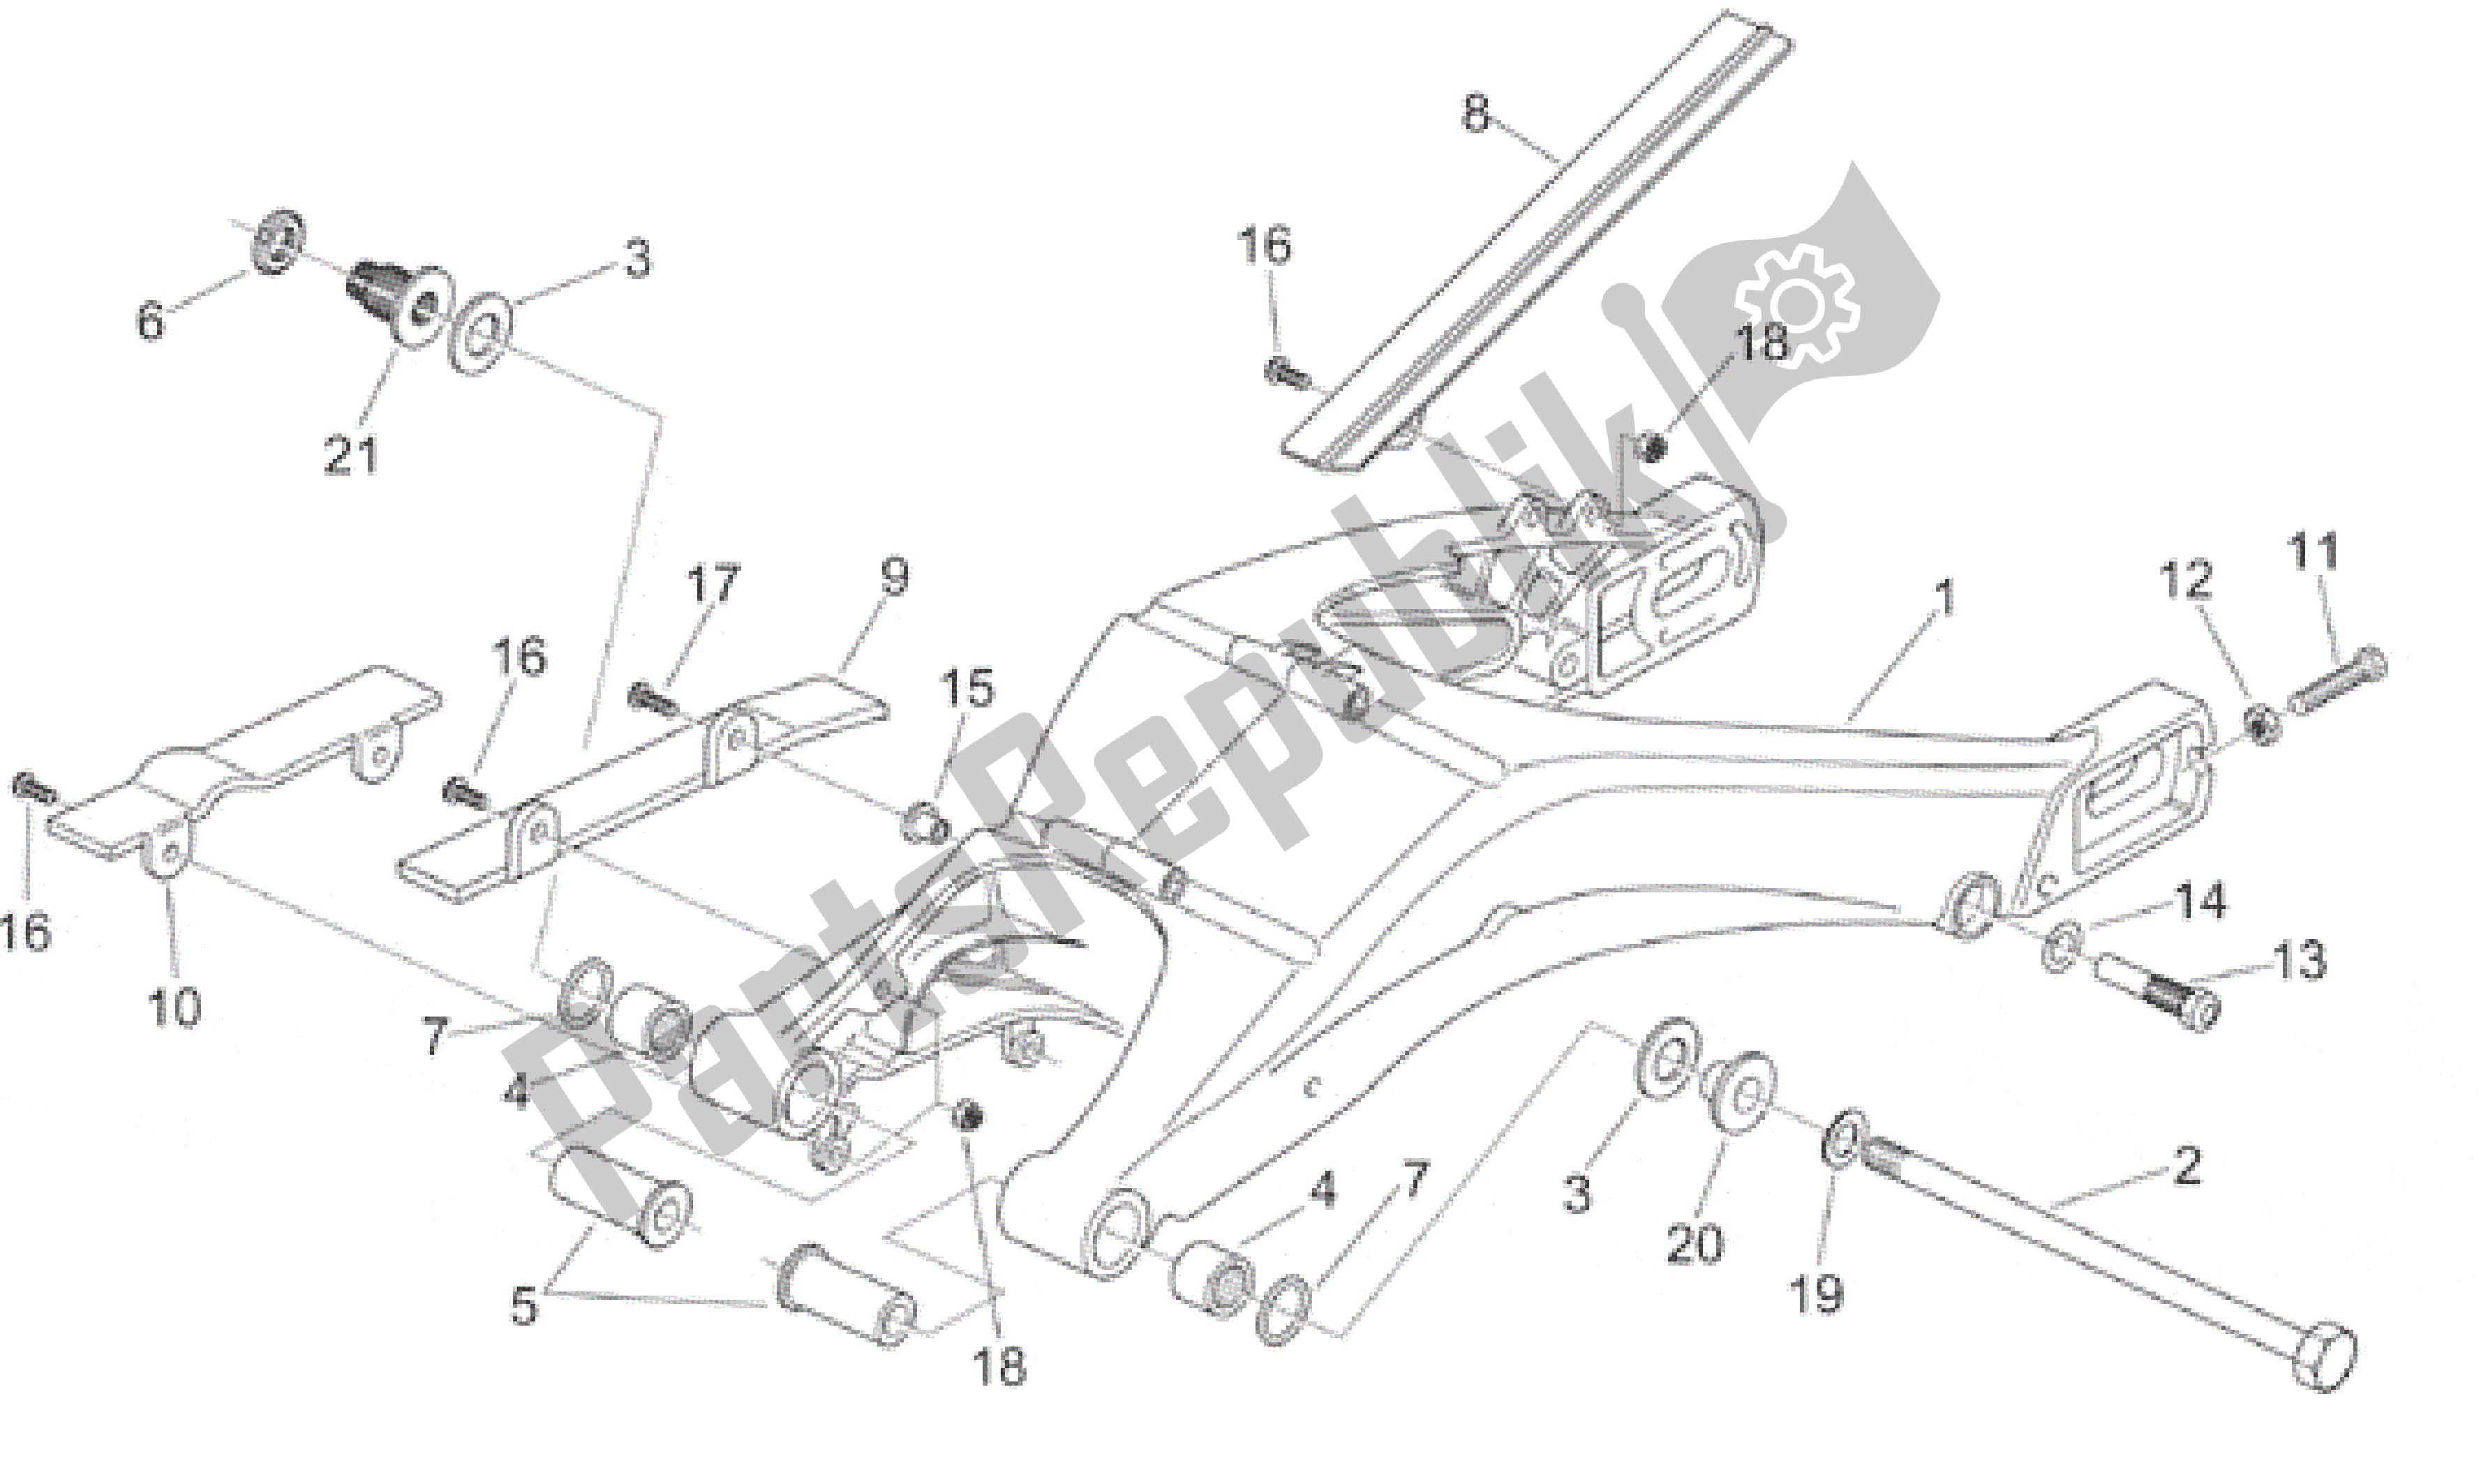 All parts for the Swing Arm of the Aprilia RS 125 1999 - 2001